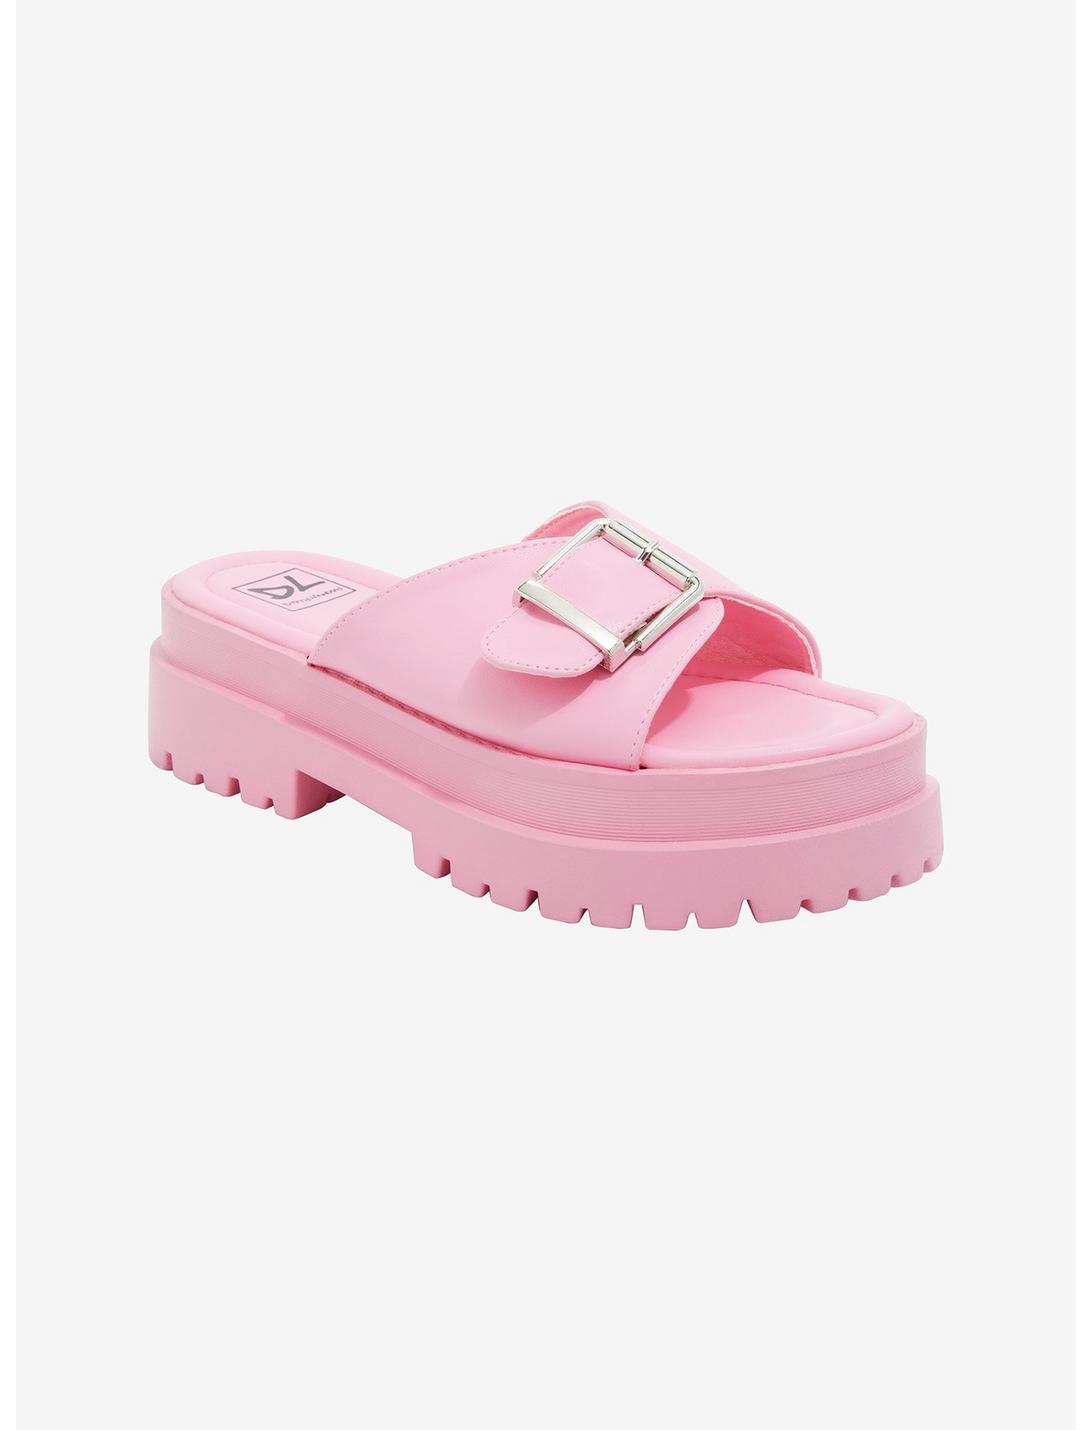 Dirty Laundry Pink Buckle Sandals, MULTI, hi-res